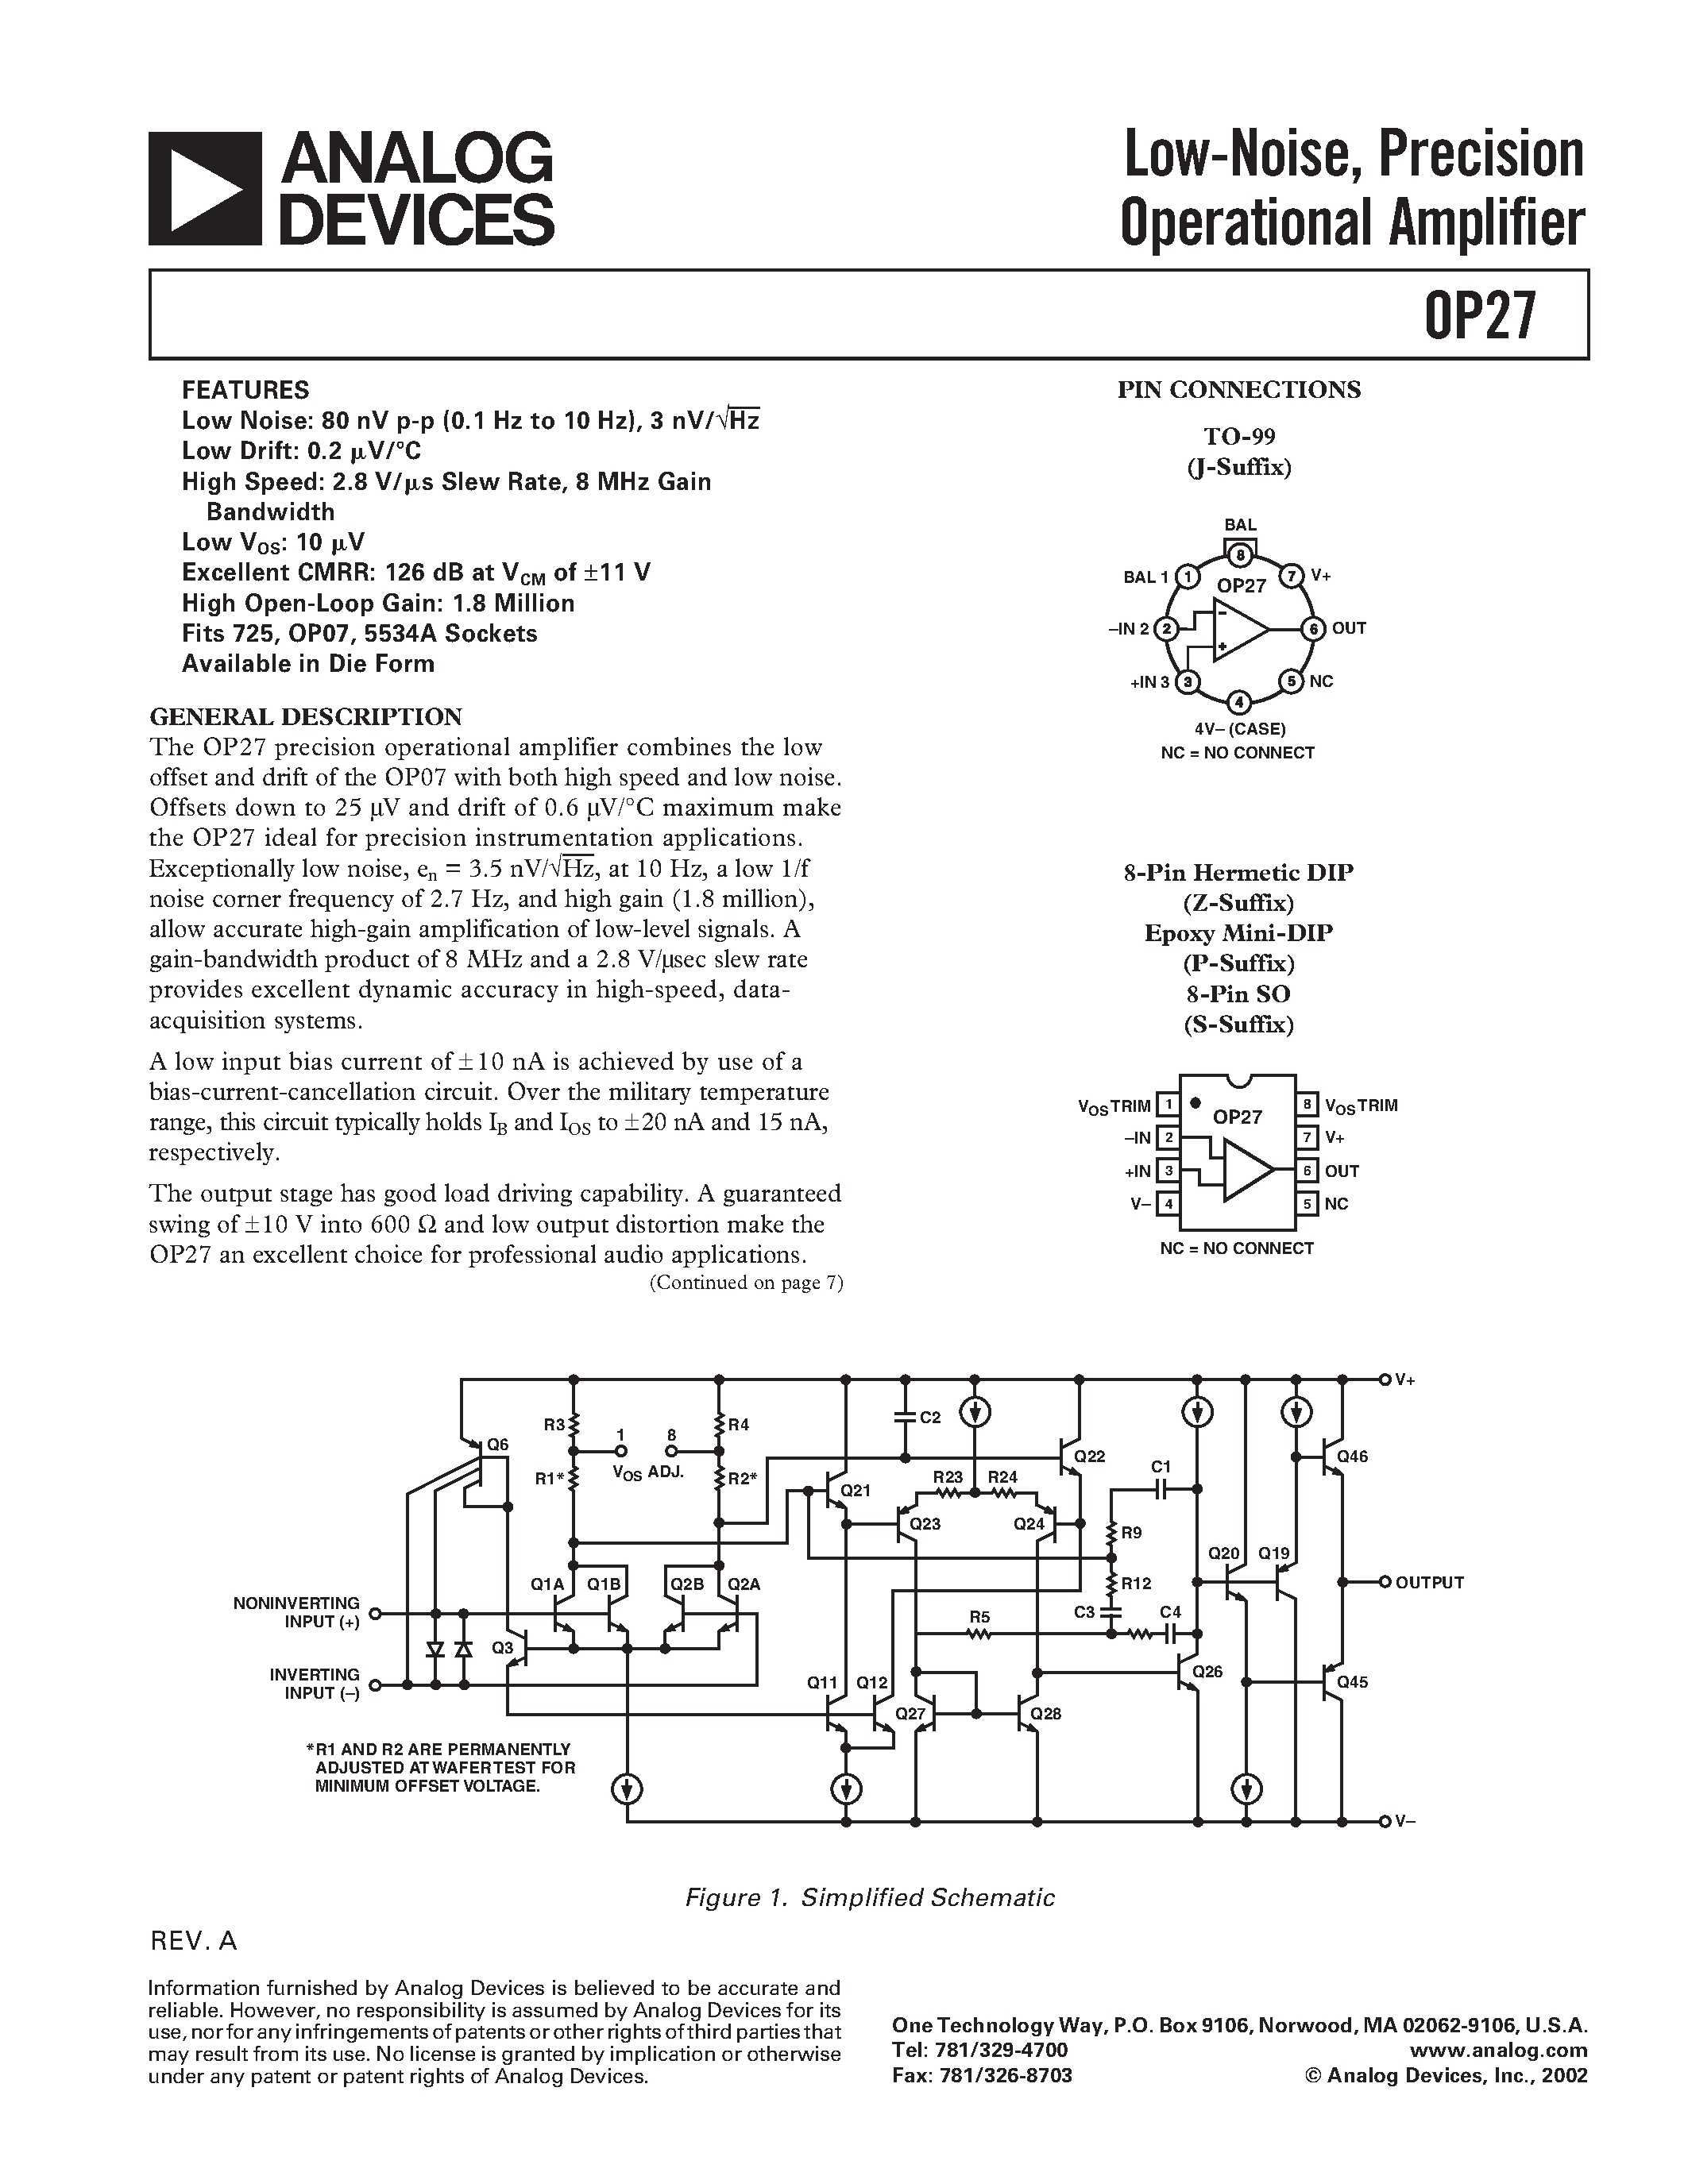 Datasheet OP27 - Low-Noise / Precision Operational Amplifier page 1